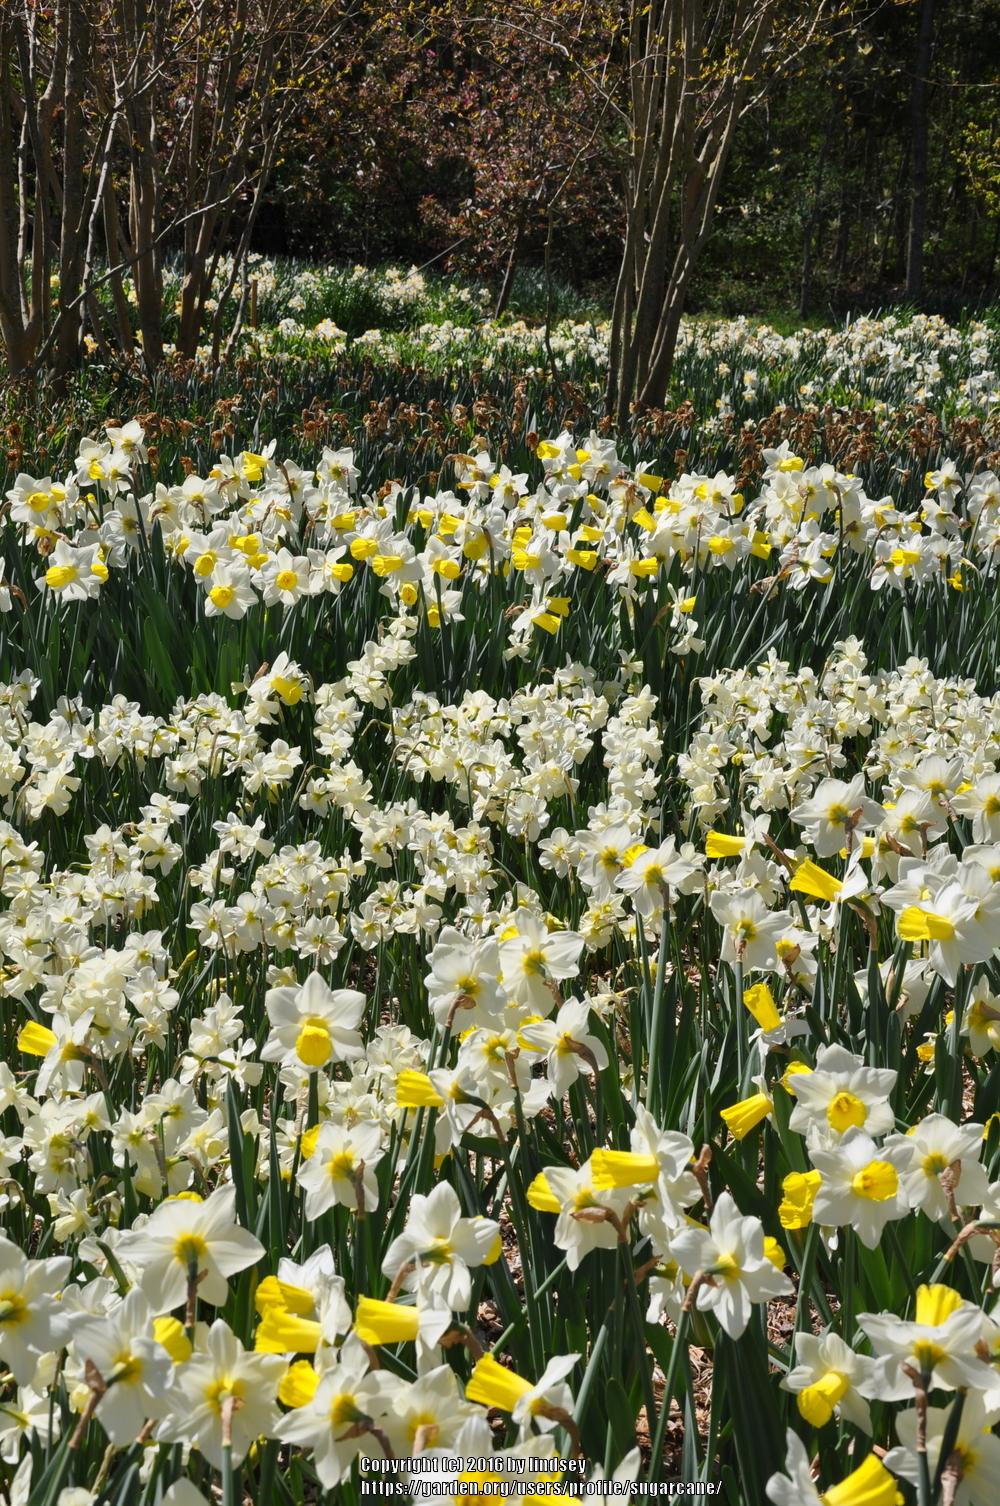 Photo of Daffodils (Narcissus) uploaded by sugarcane